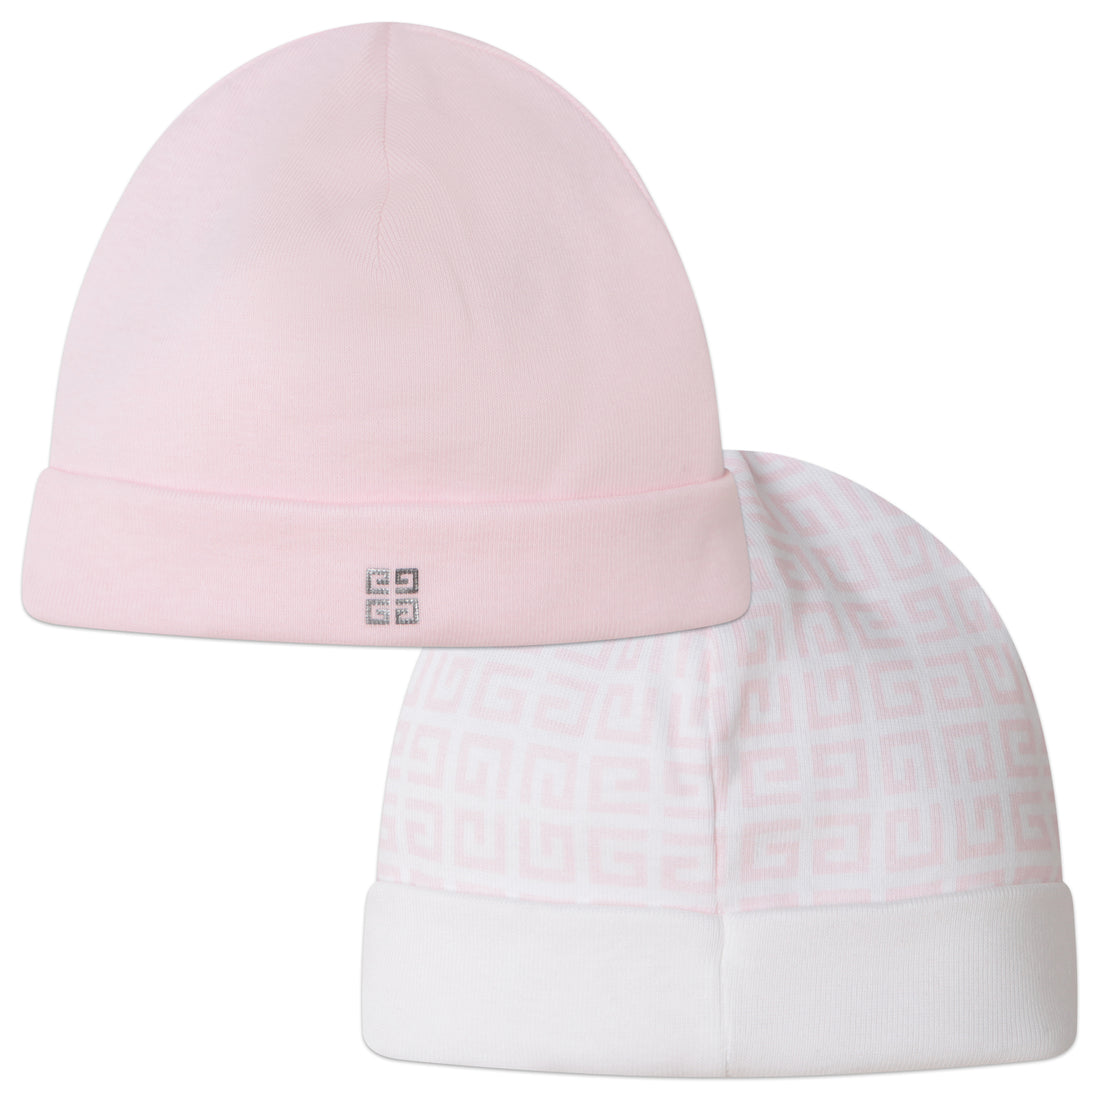 Givenchy Pull On Hat Style: H98171